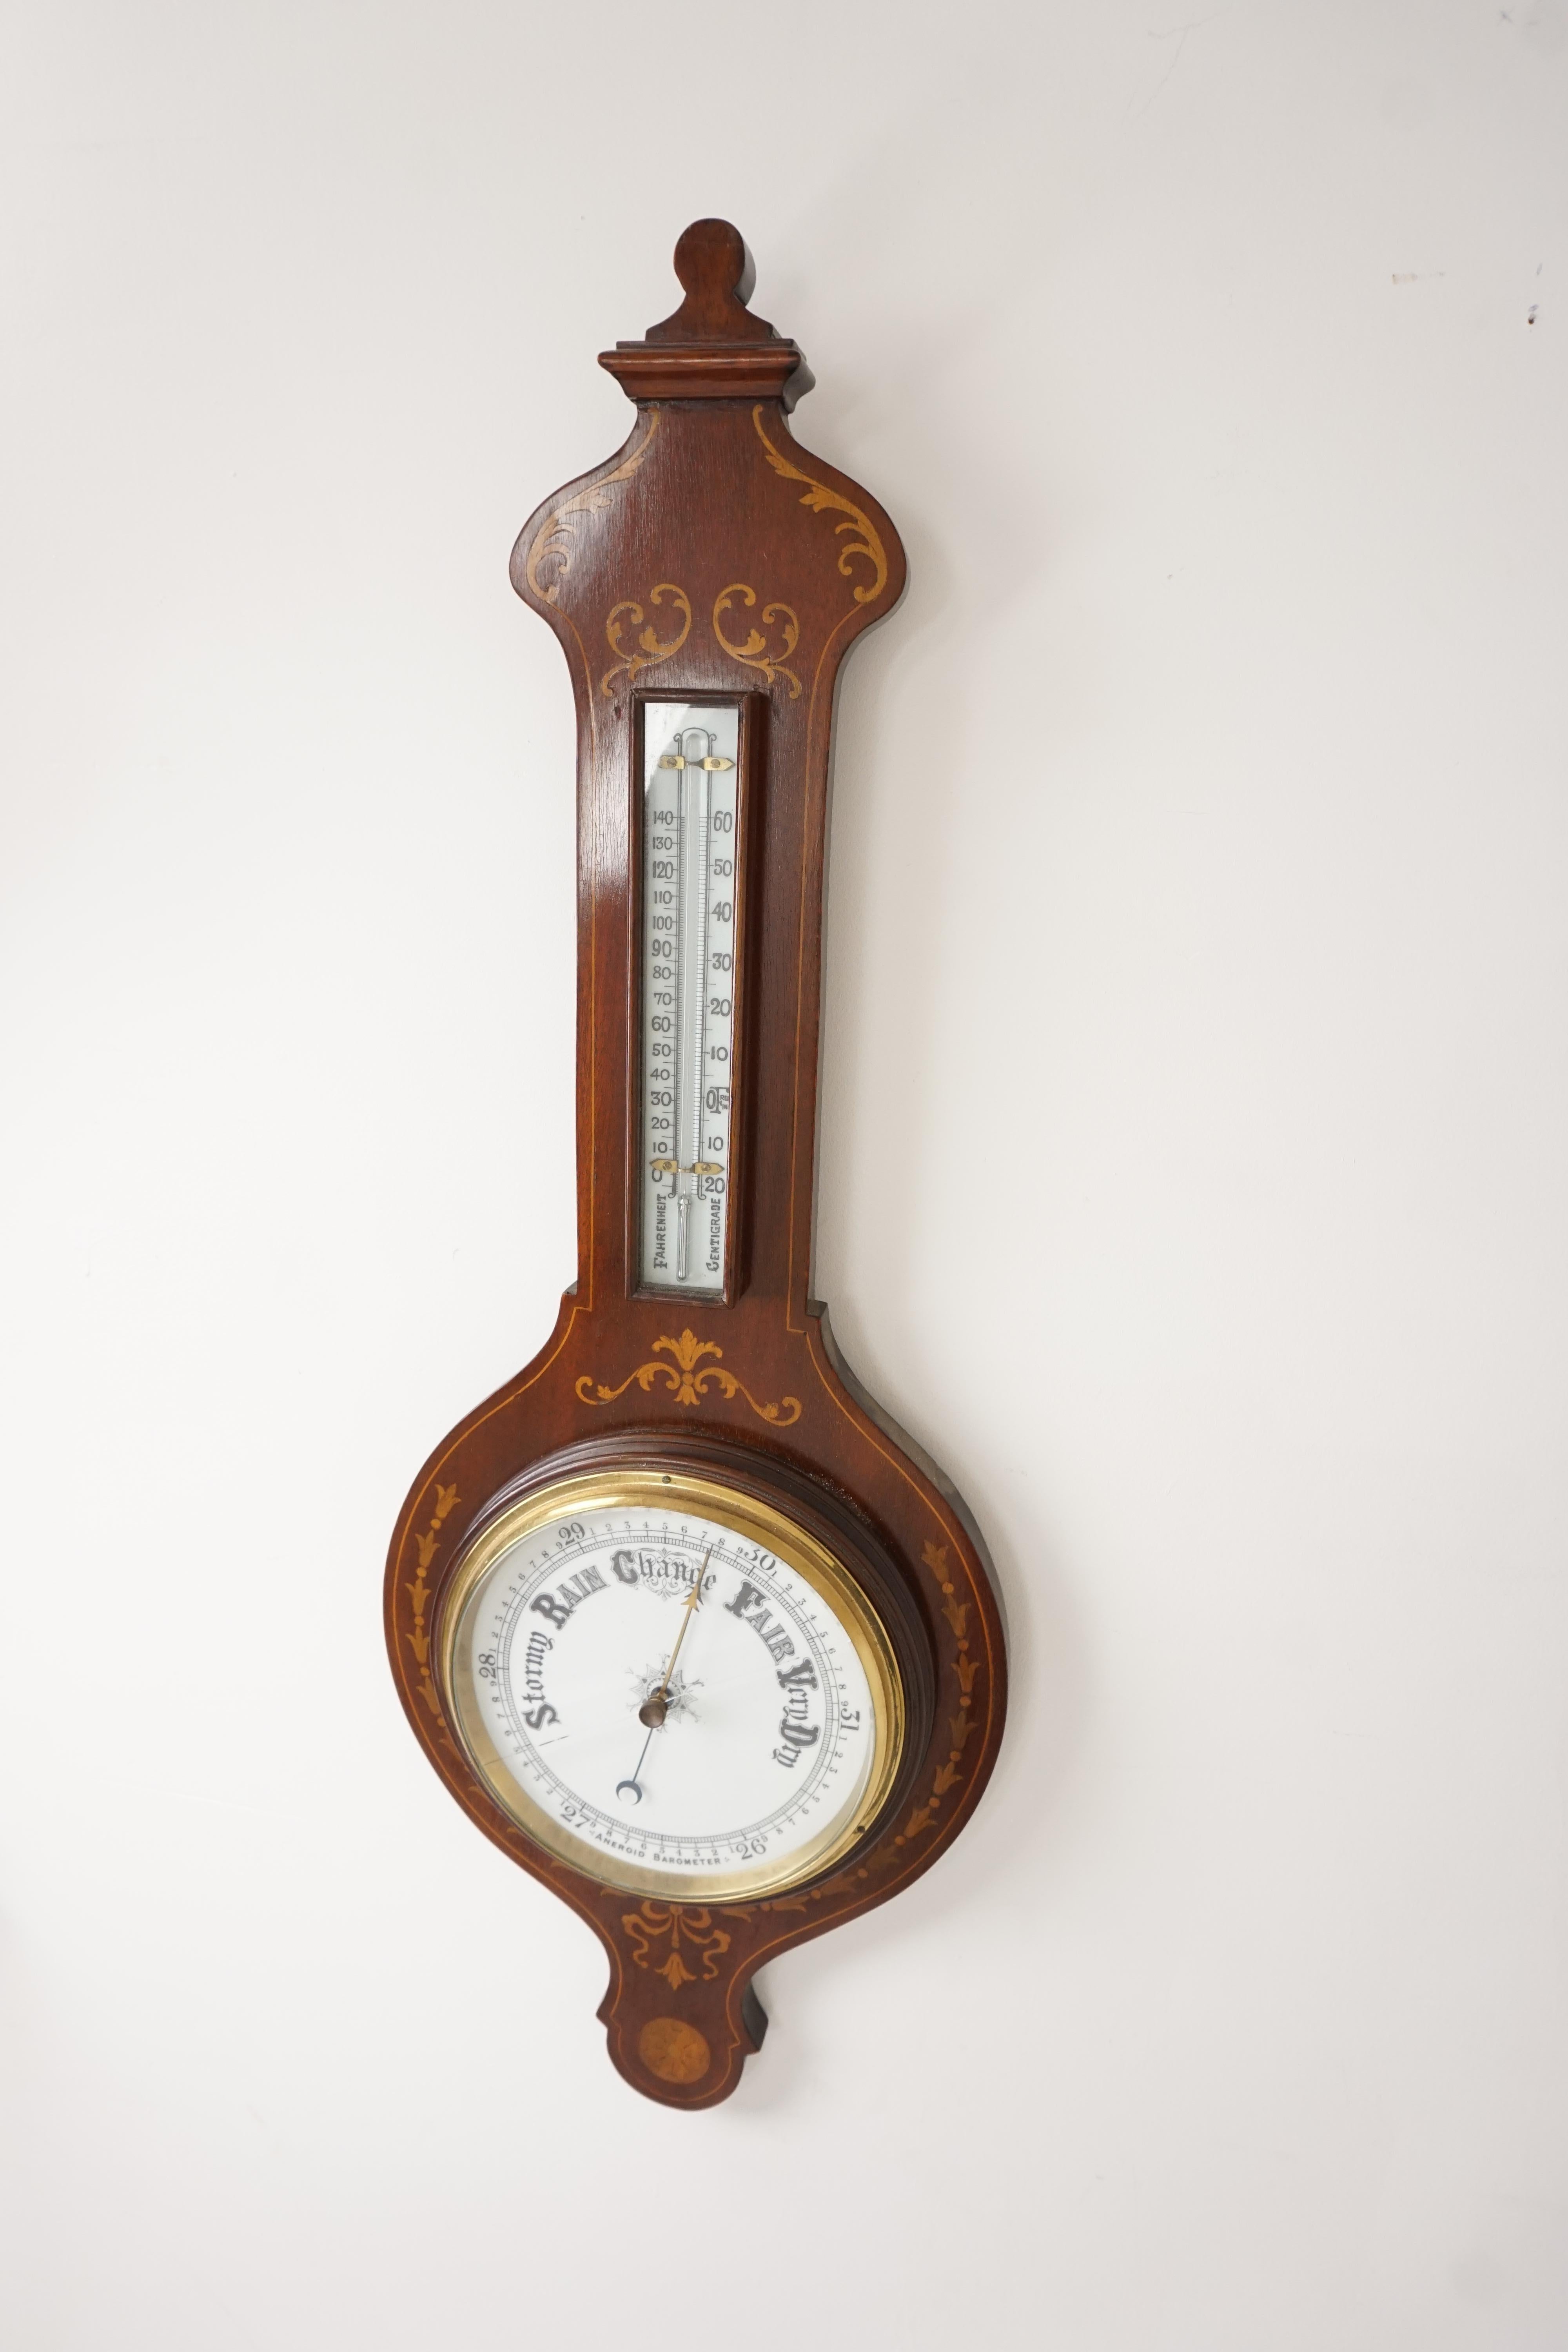 Hand-Crafted Antique Art Nouveau Barometer, Sheraton Inlaid Aneroid Barometer, Scotland, 1910 For Sale